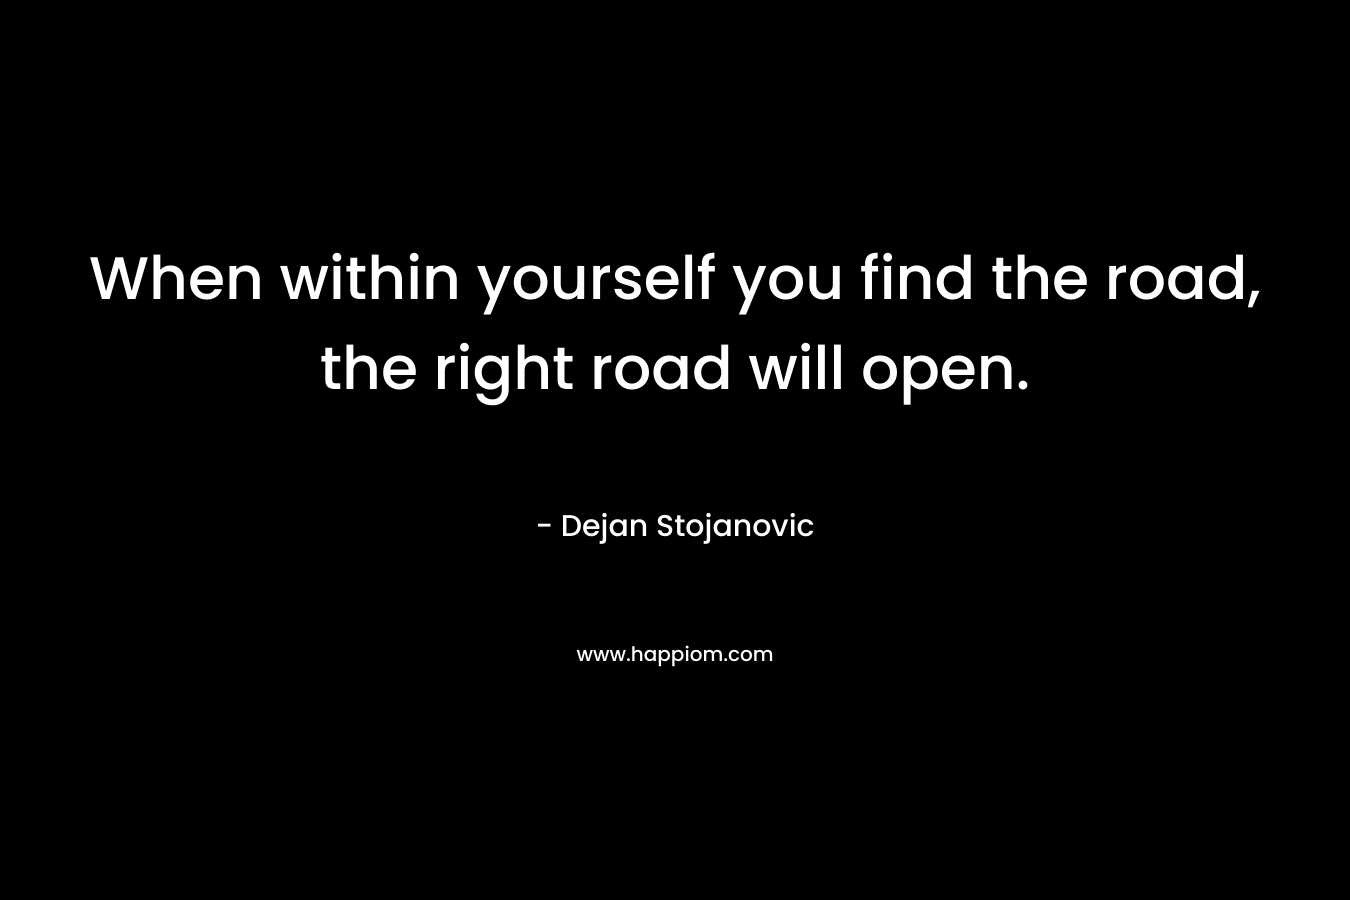 When within yourself you find the road, the right road will open.